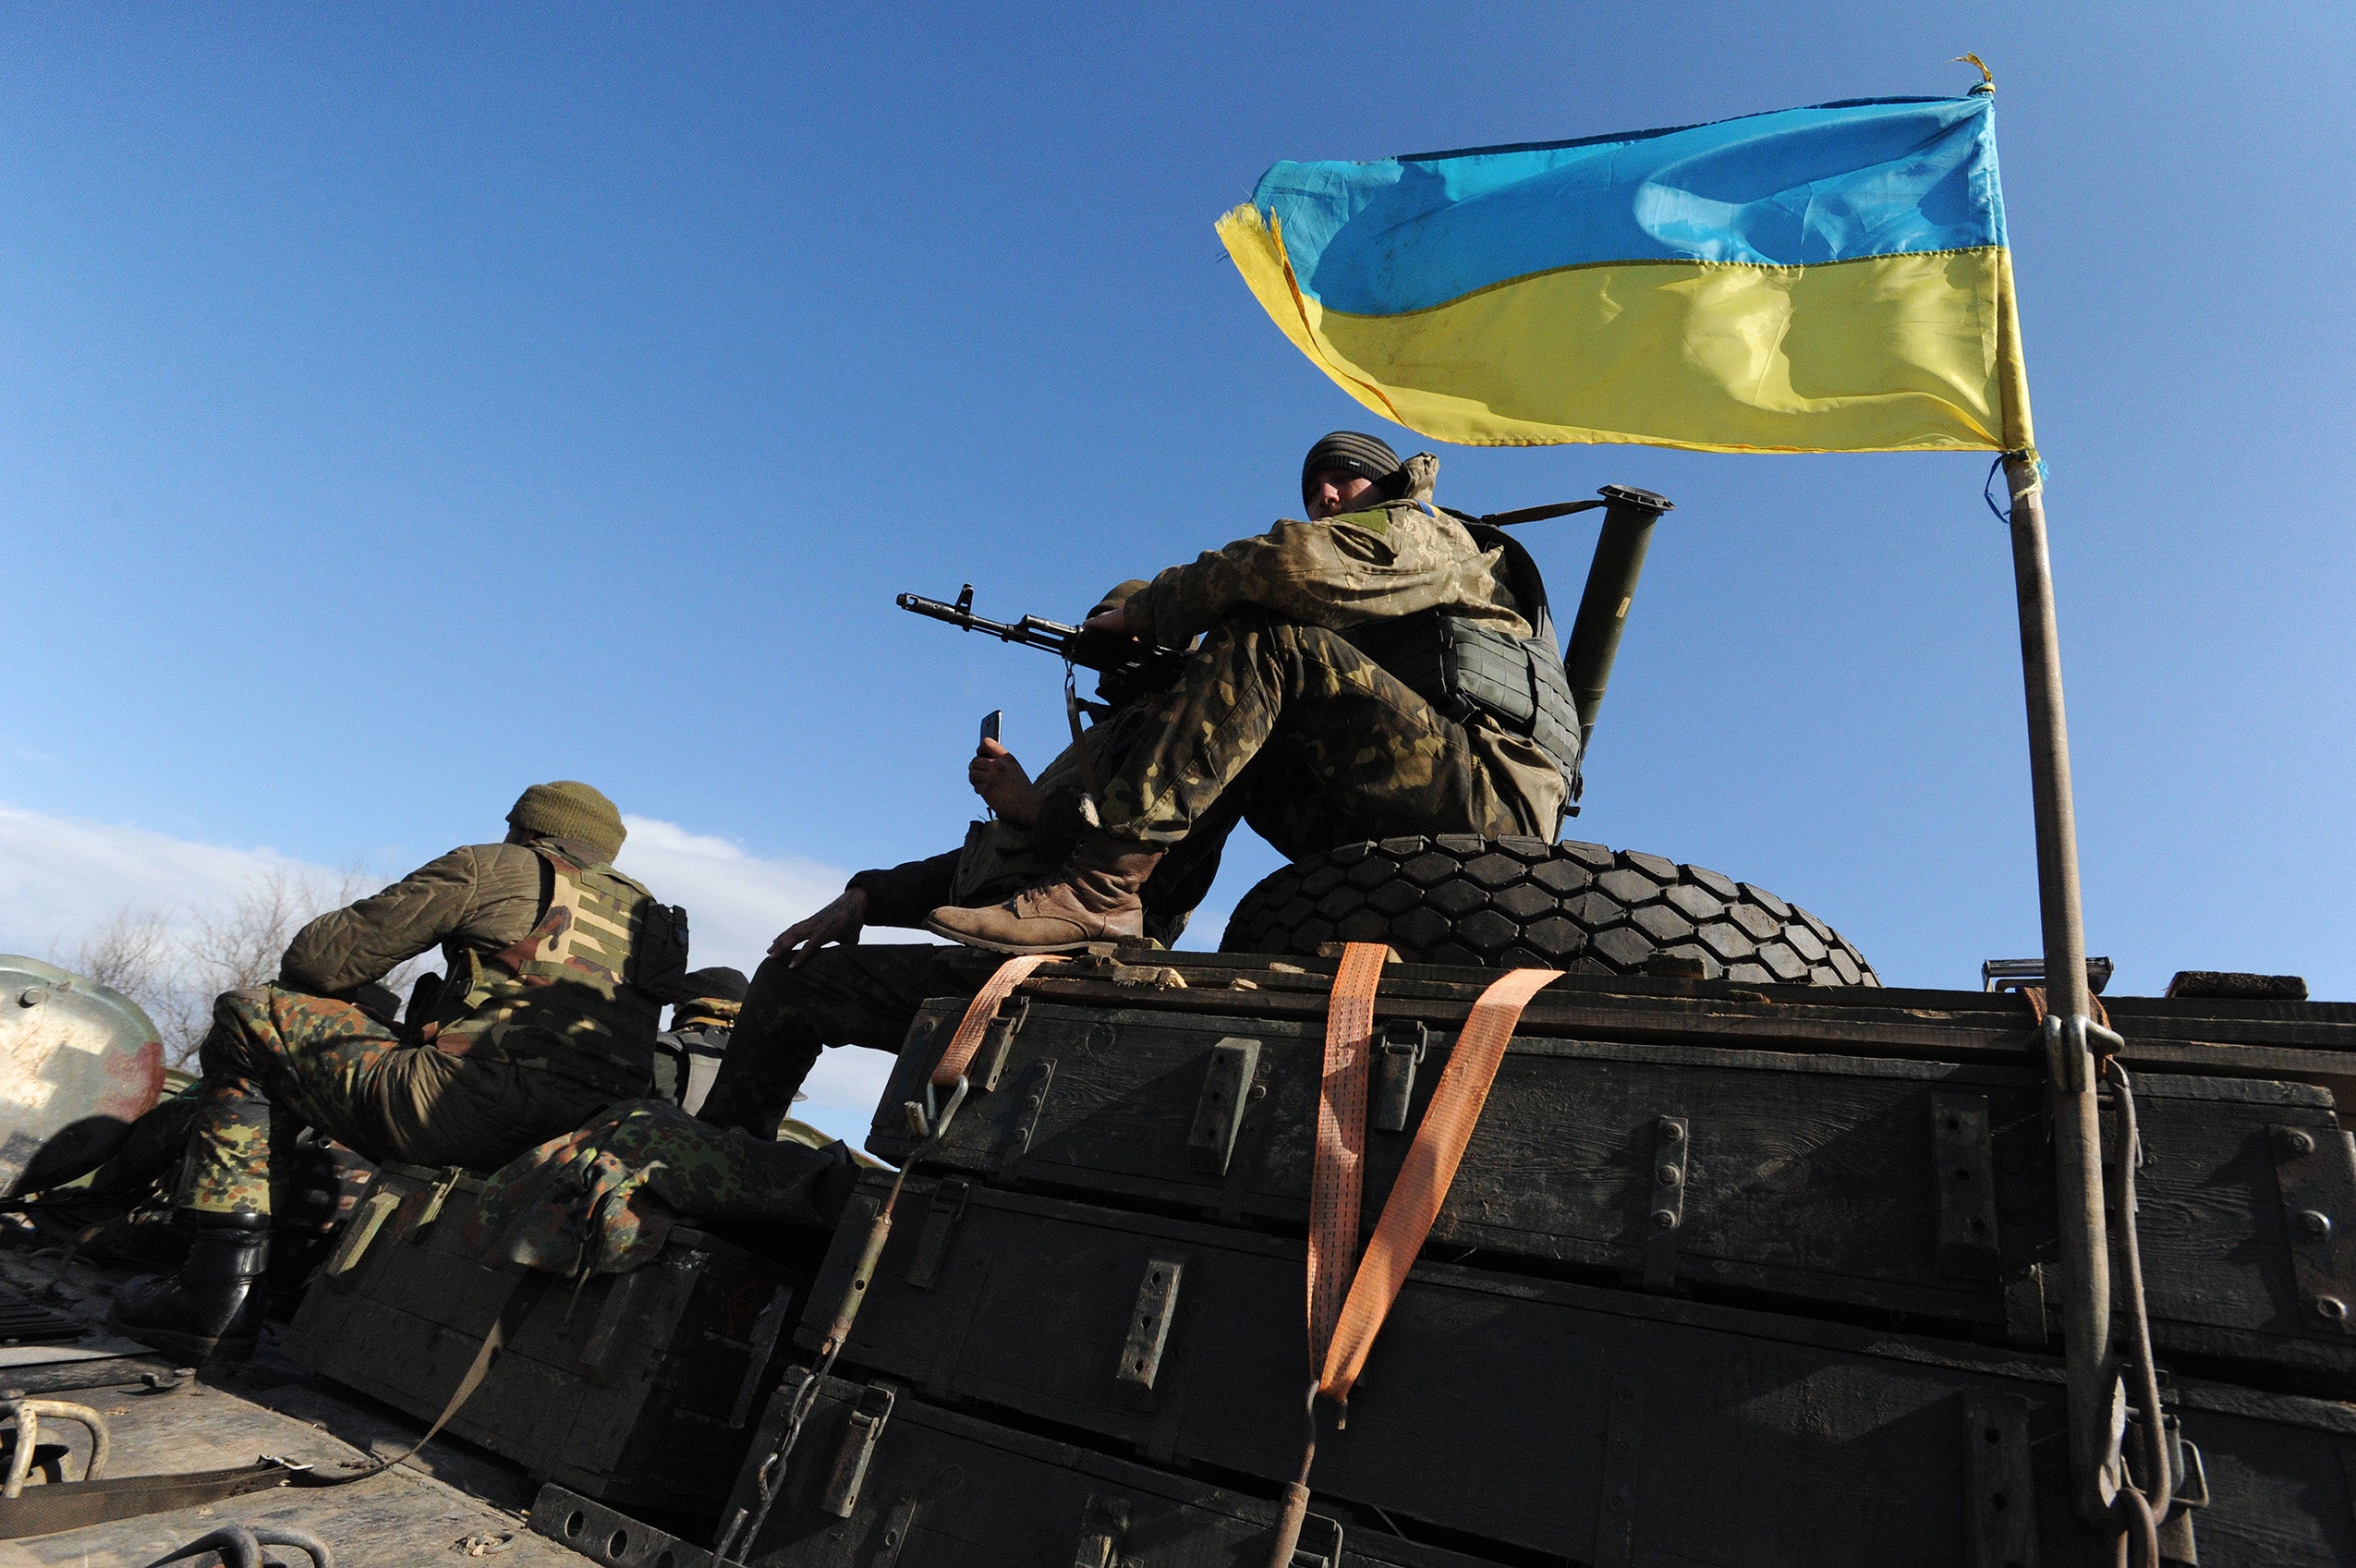 A soldier sitting on top of a military tank that is flying the Ukranian flag